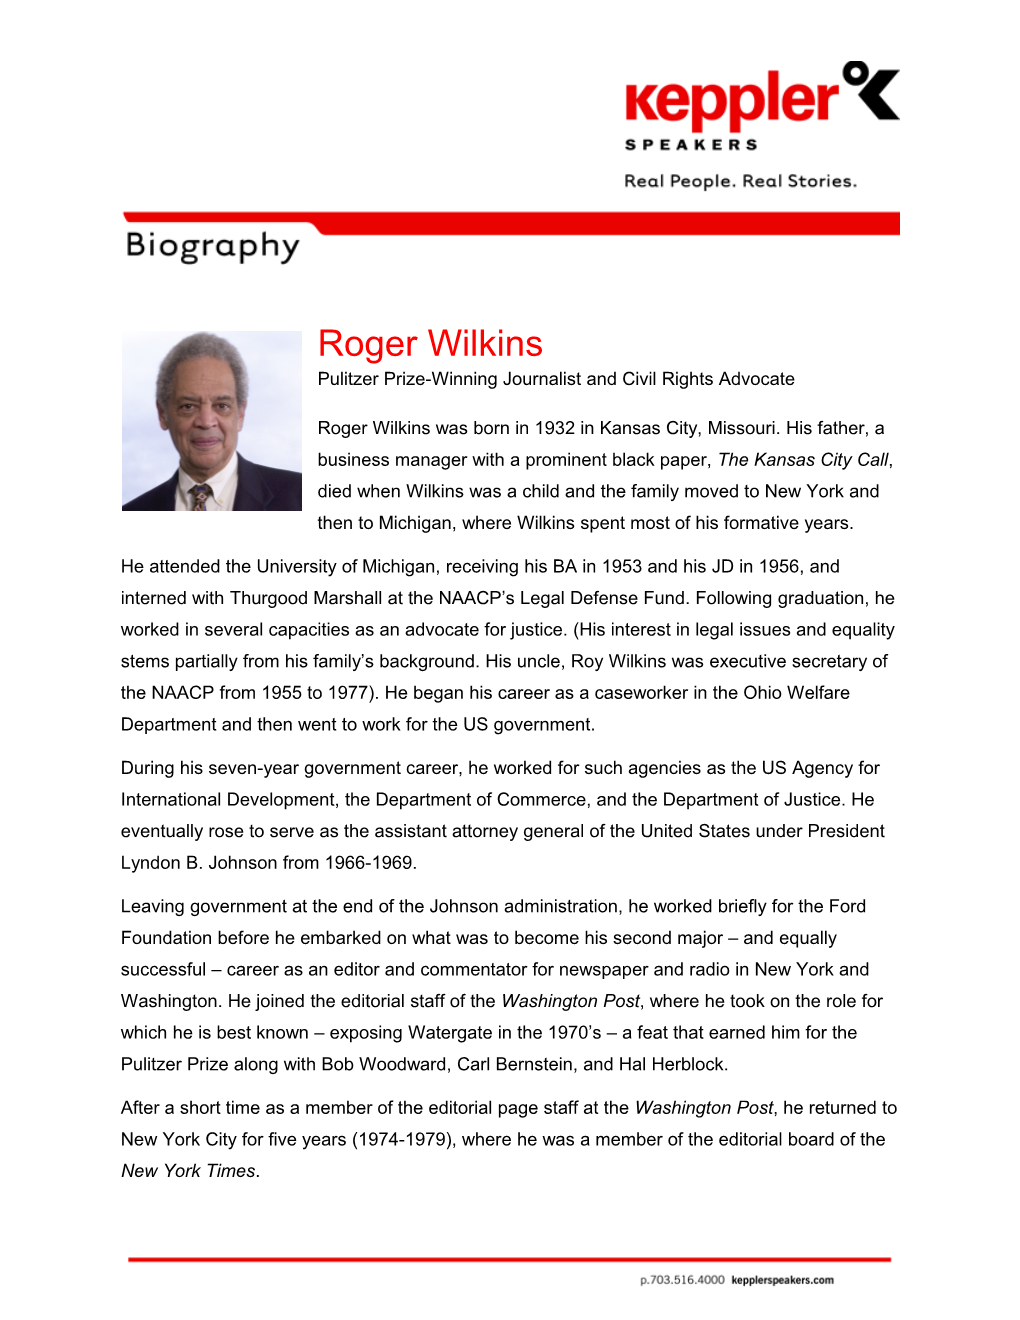 Roger Wilkins Pulitzer Prize-Winning Journalist and Civil Rights Advocate